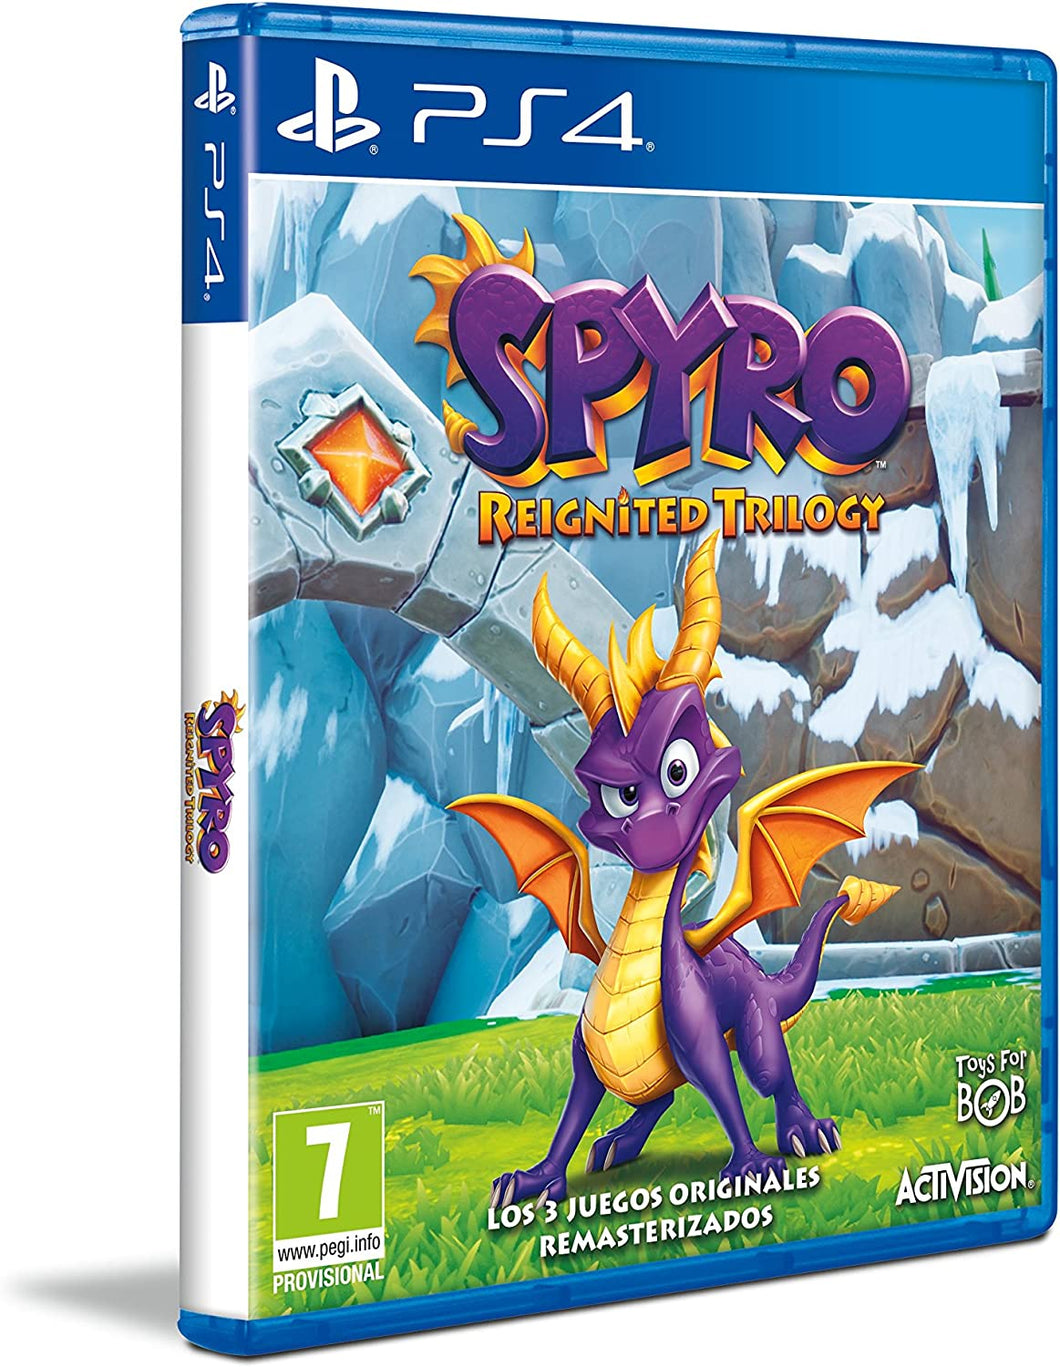 SONY PS4 GAME SPYRO REIGNITED TRILOGY